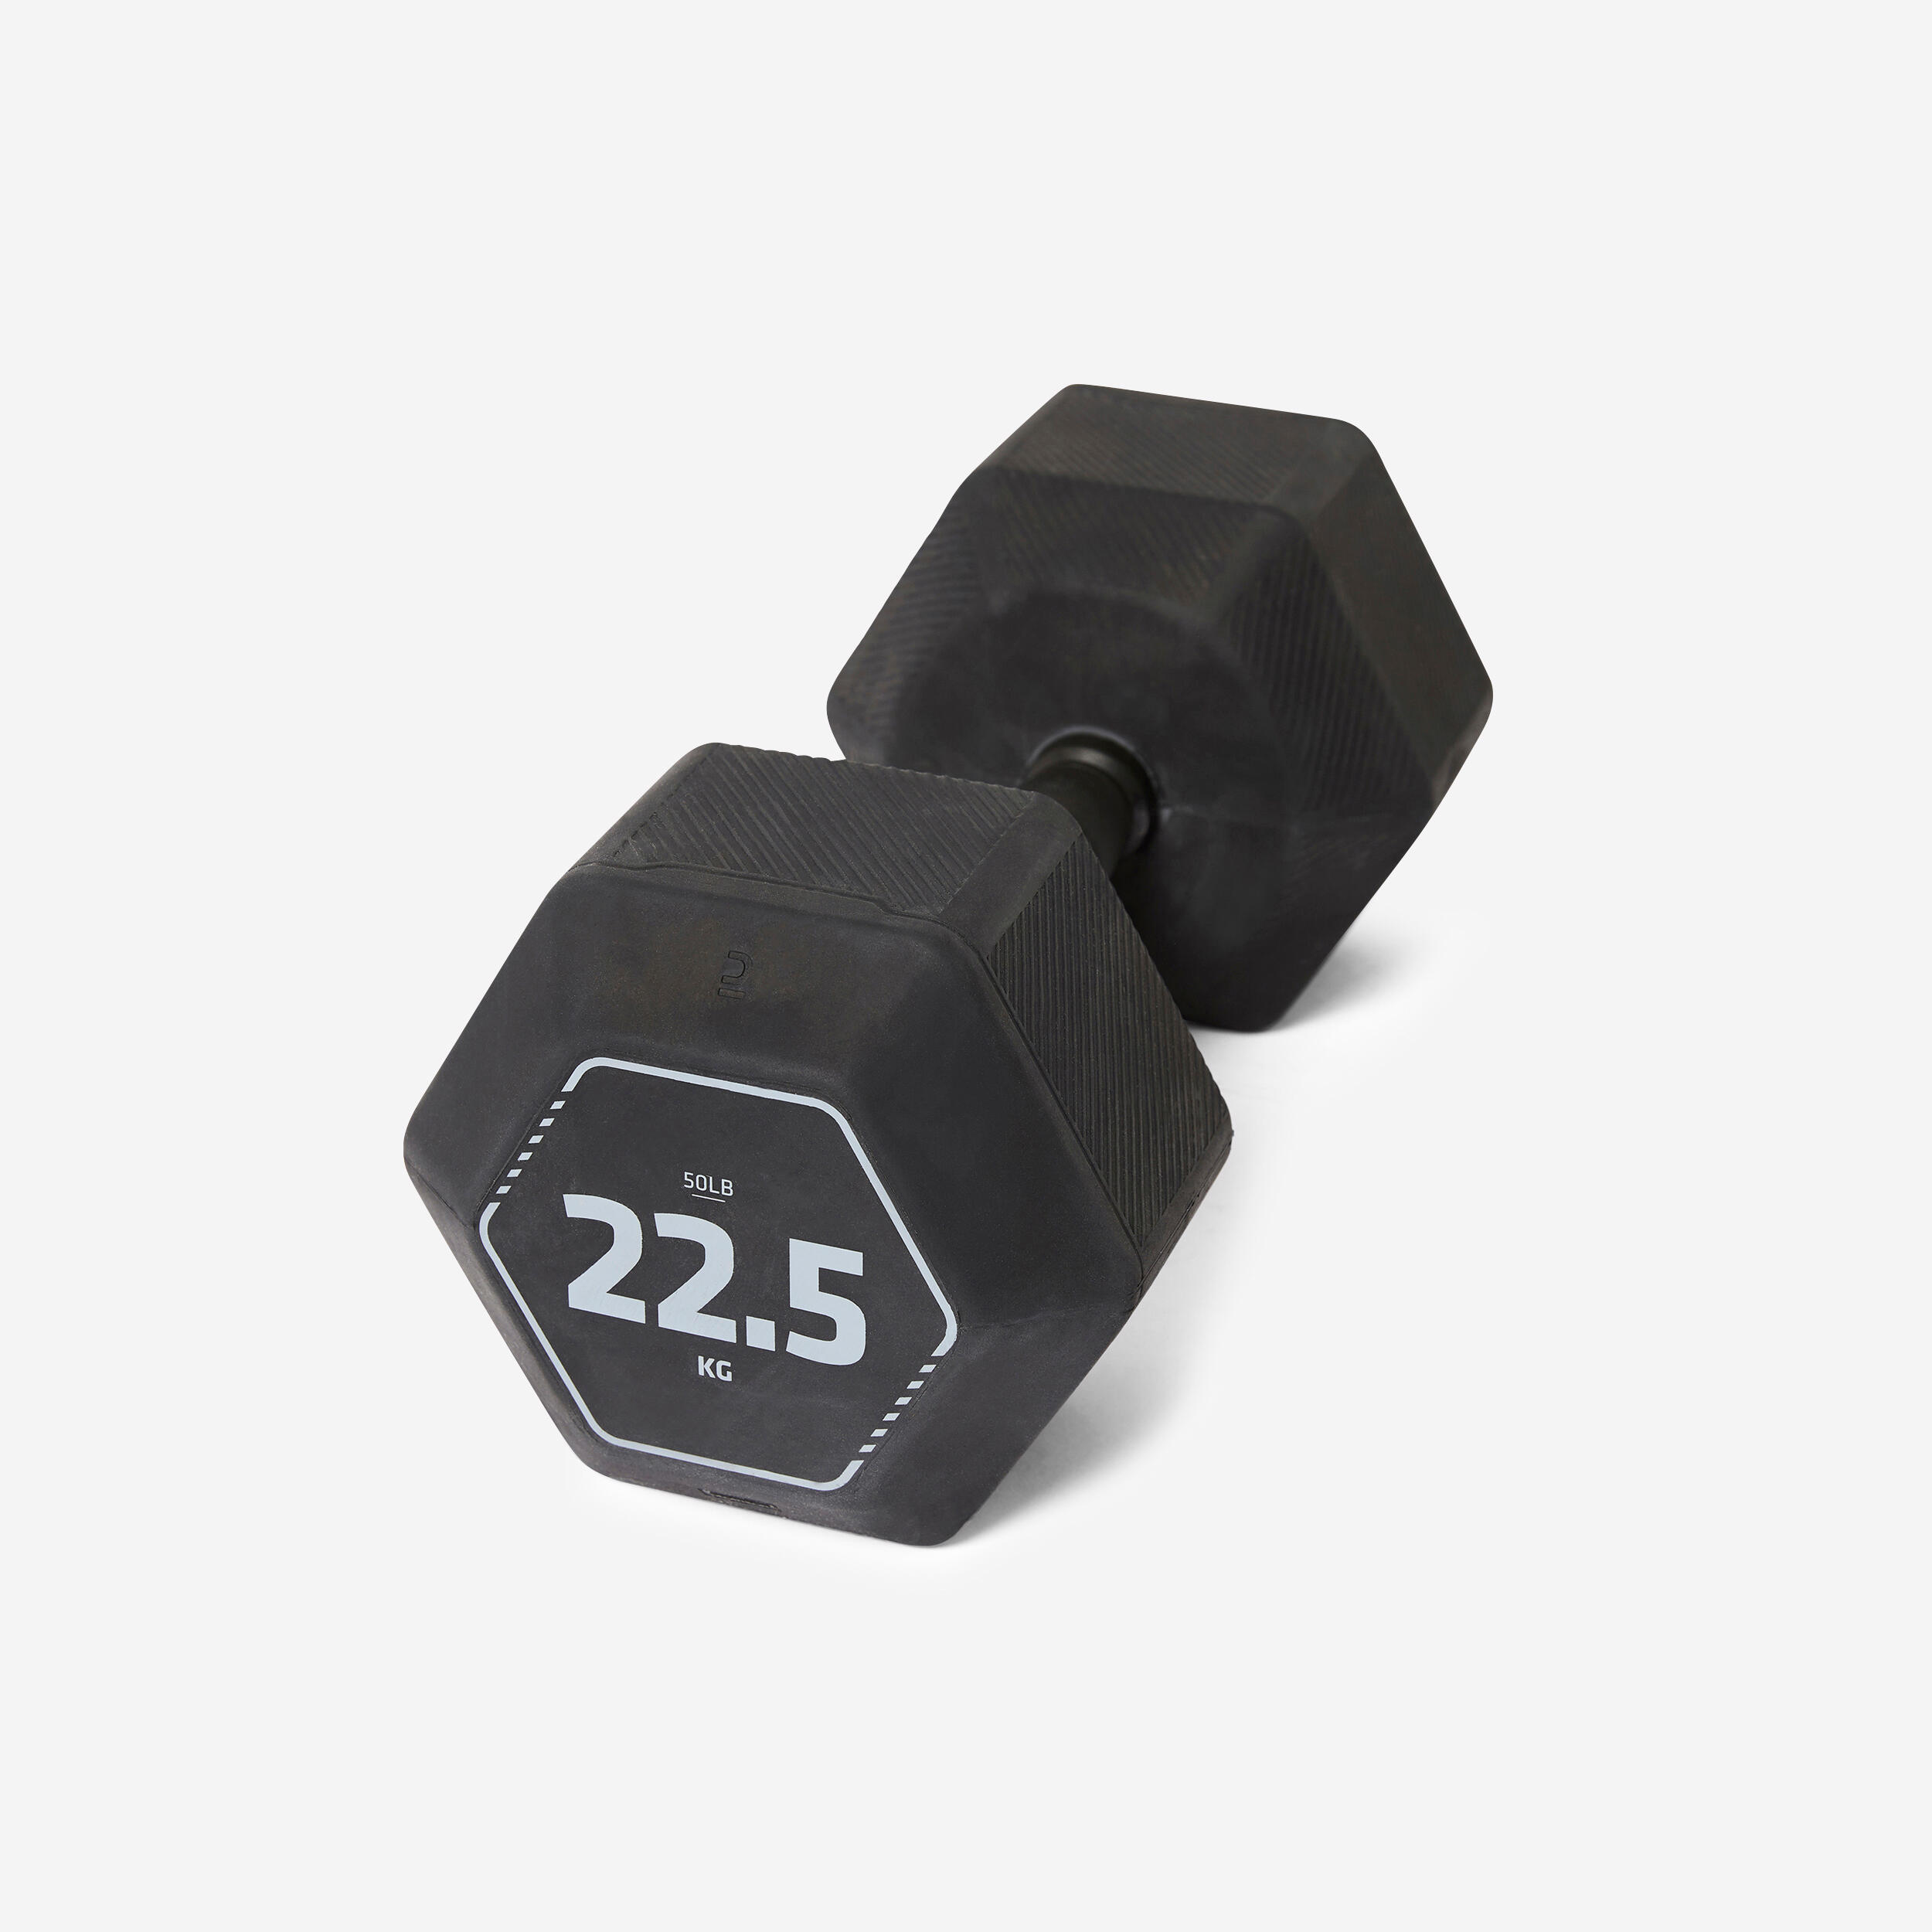 CORENGTH Cross-Training and Weight Training Hex Dumbbells 22.5 kg - Black